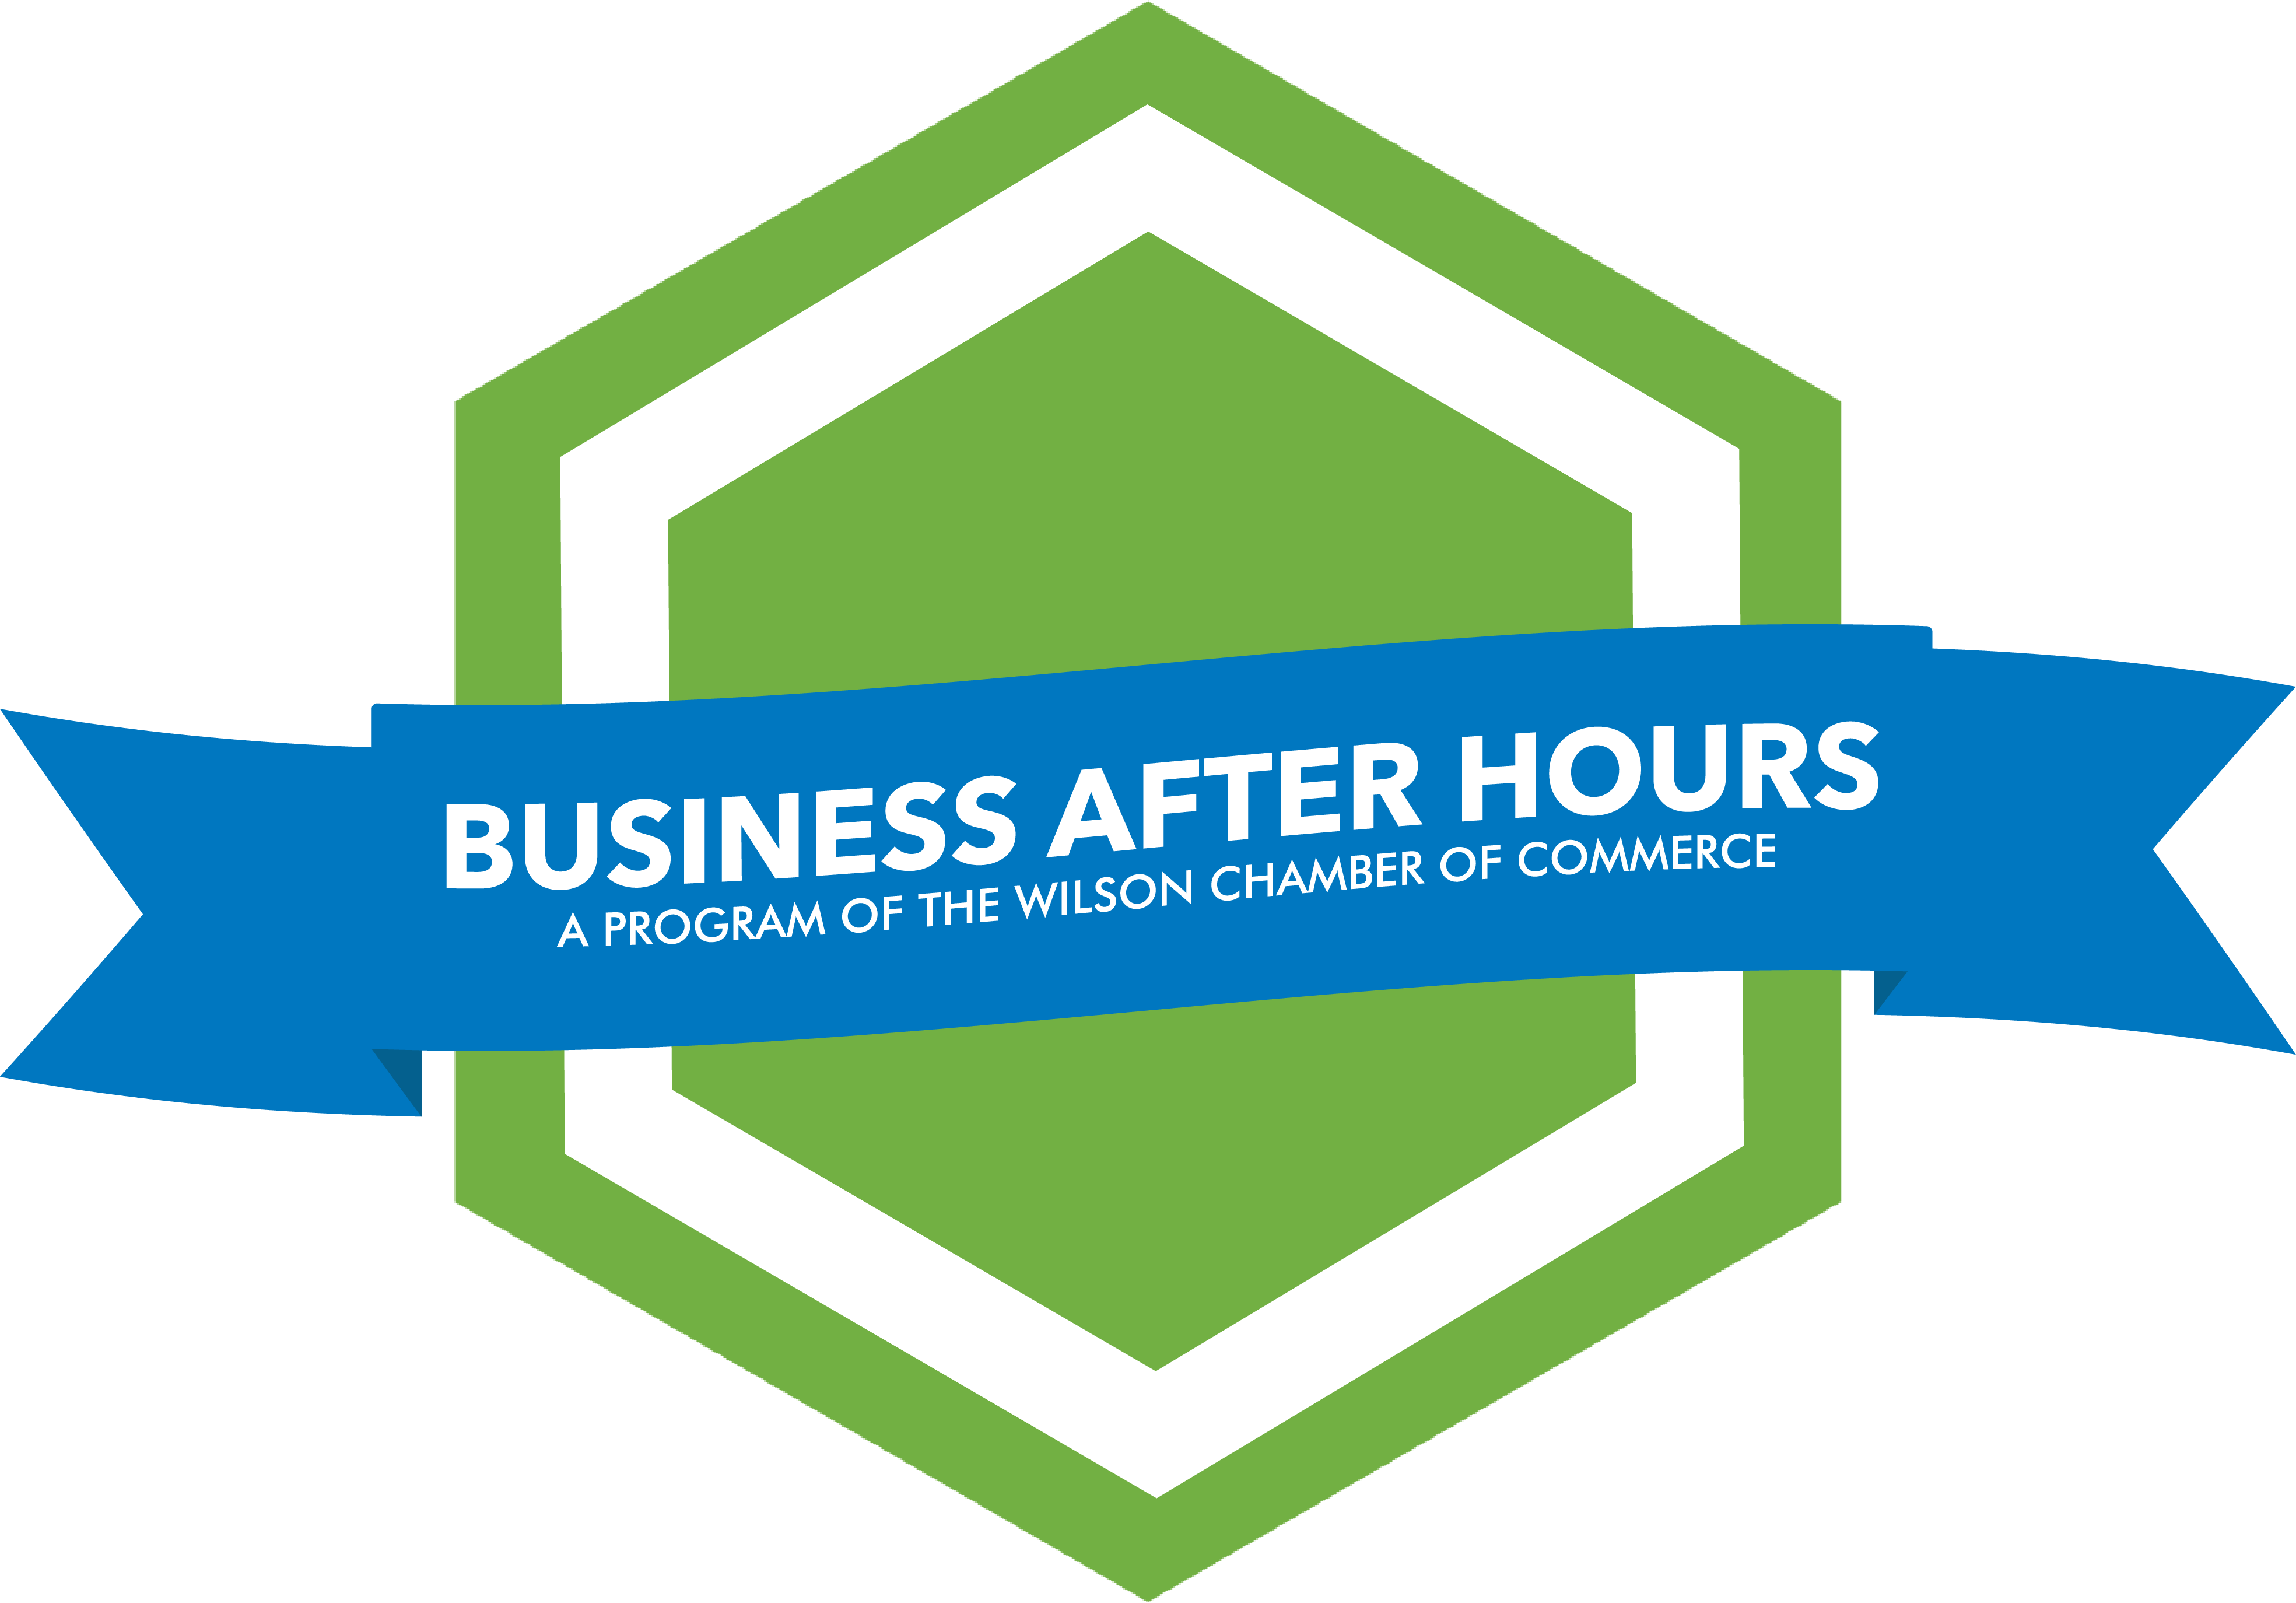 Promote your business with an open house or business after hours